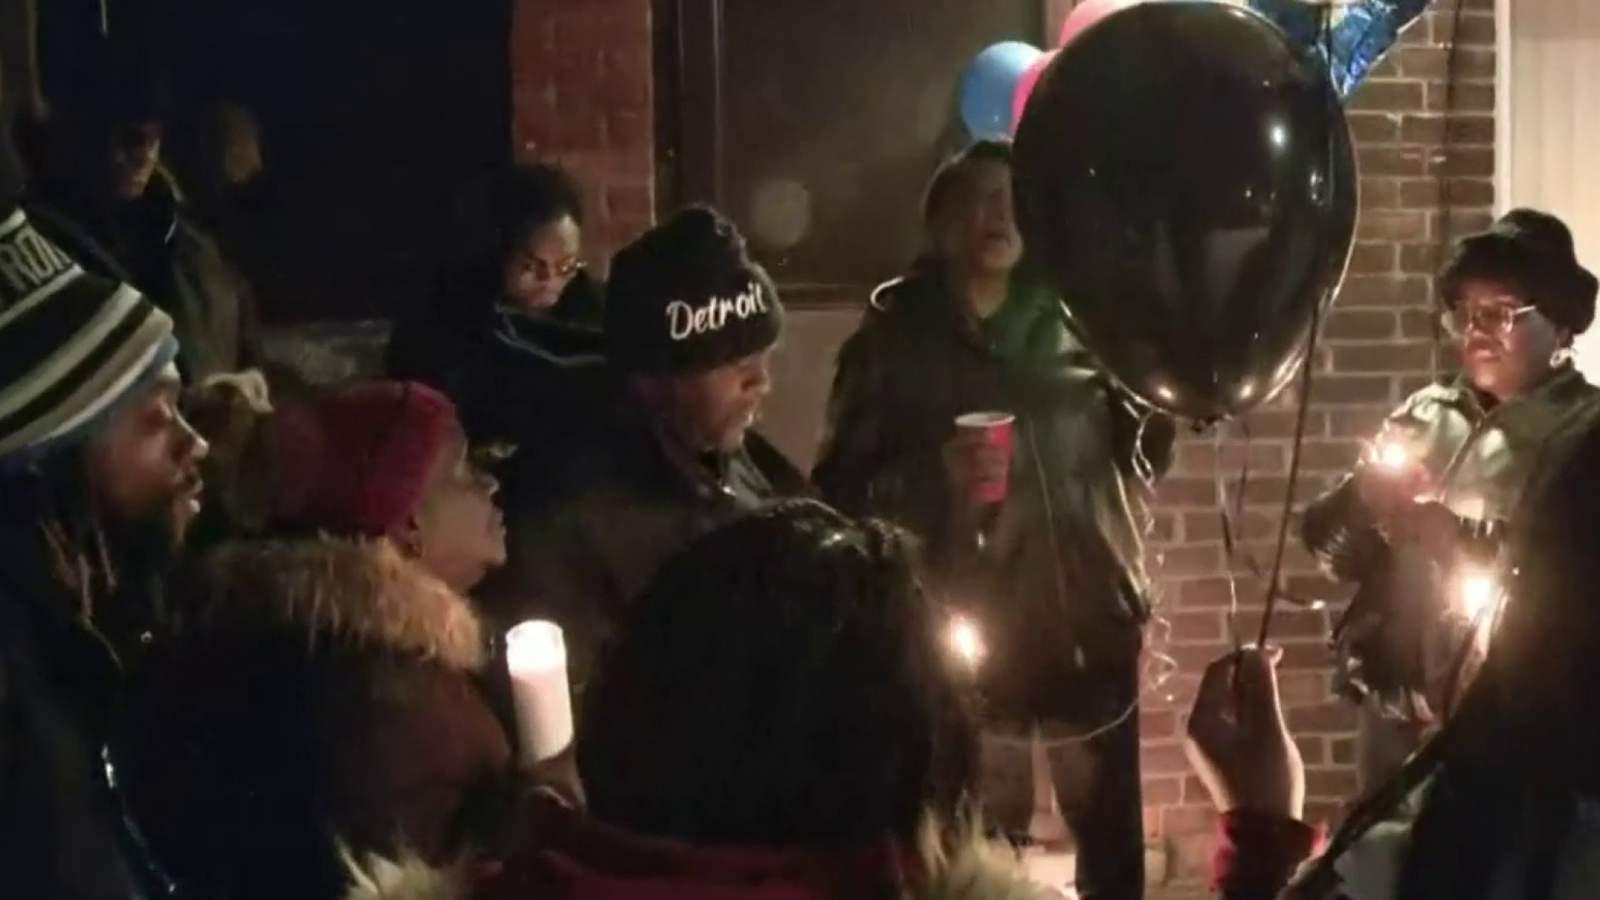 Vigil held for two people killed in River Rouge